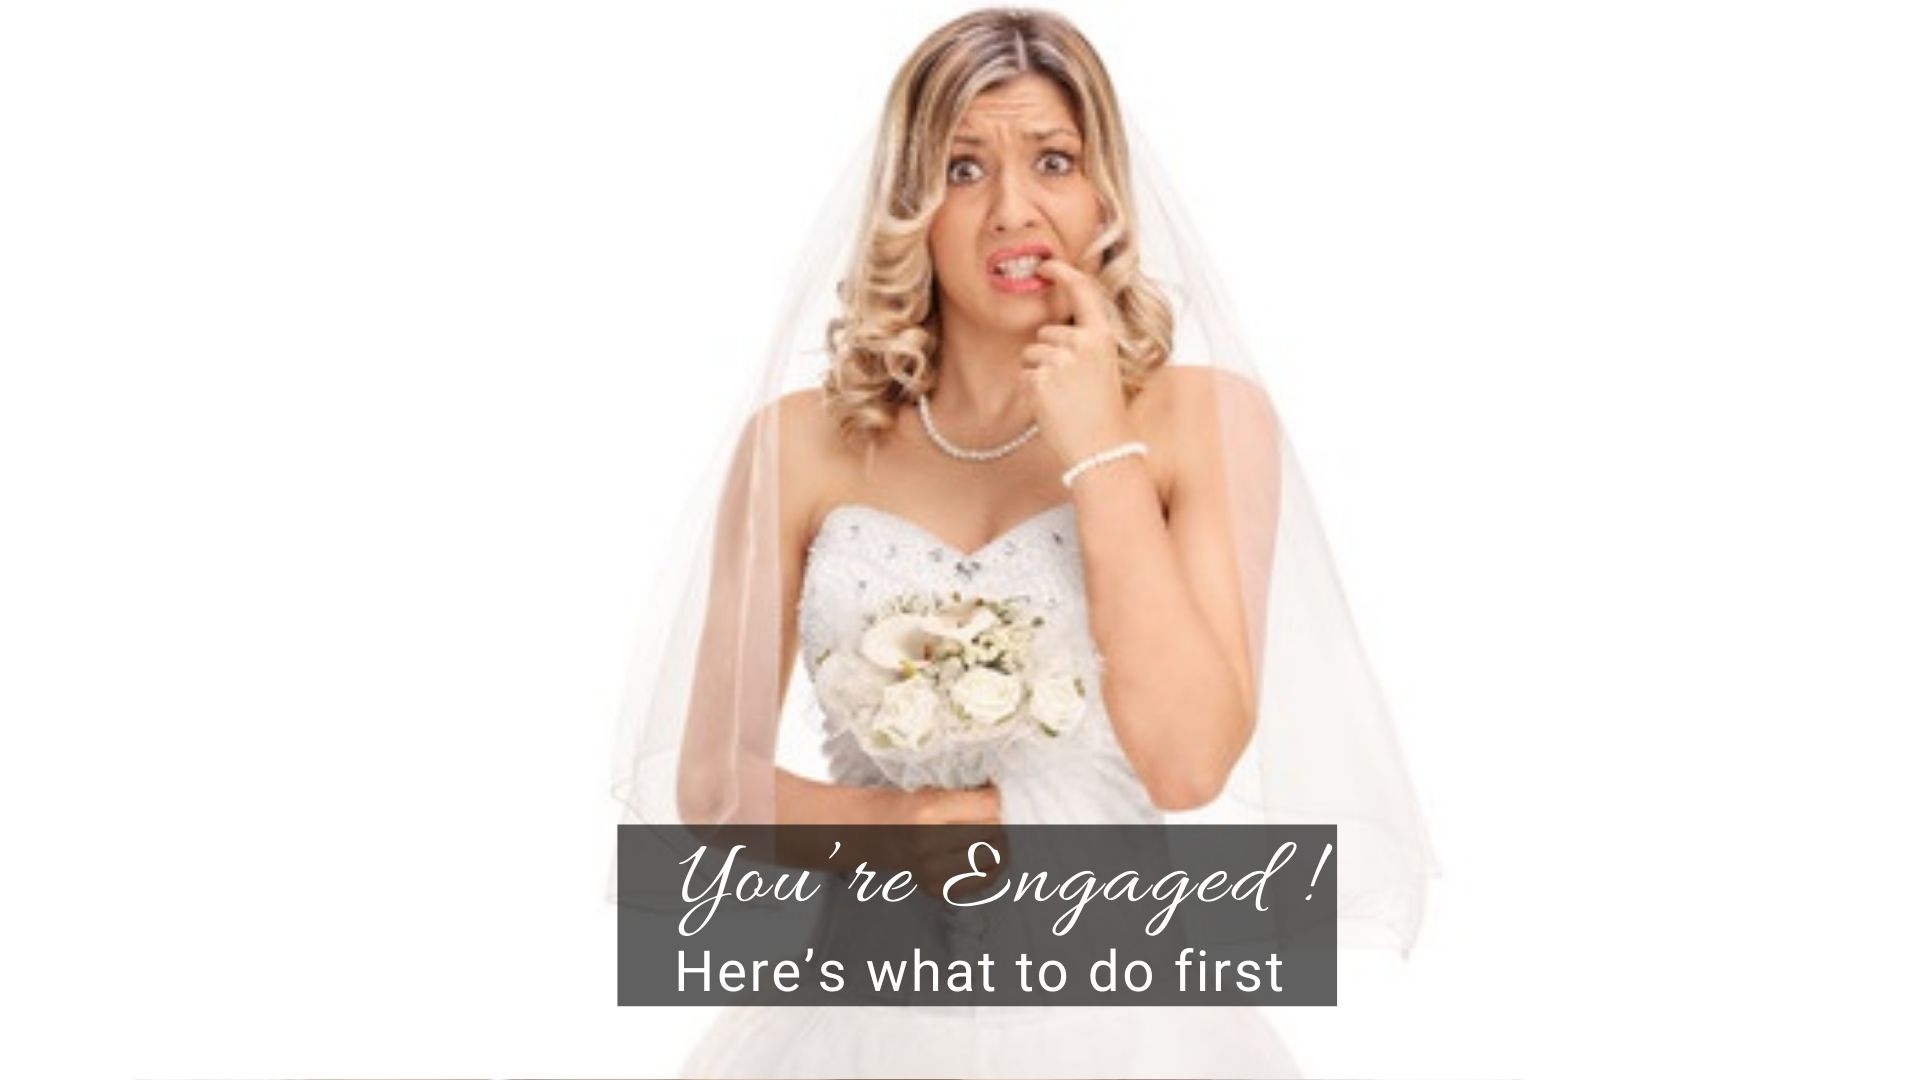 You’re engaged! Here’s what to do first